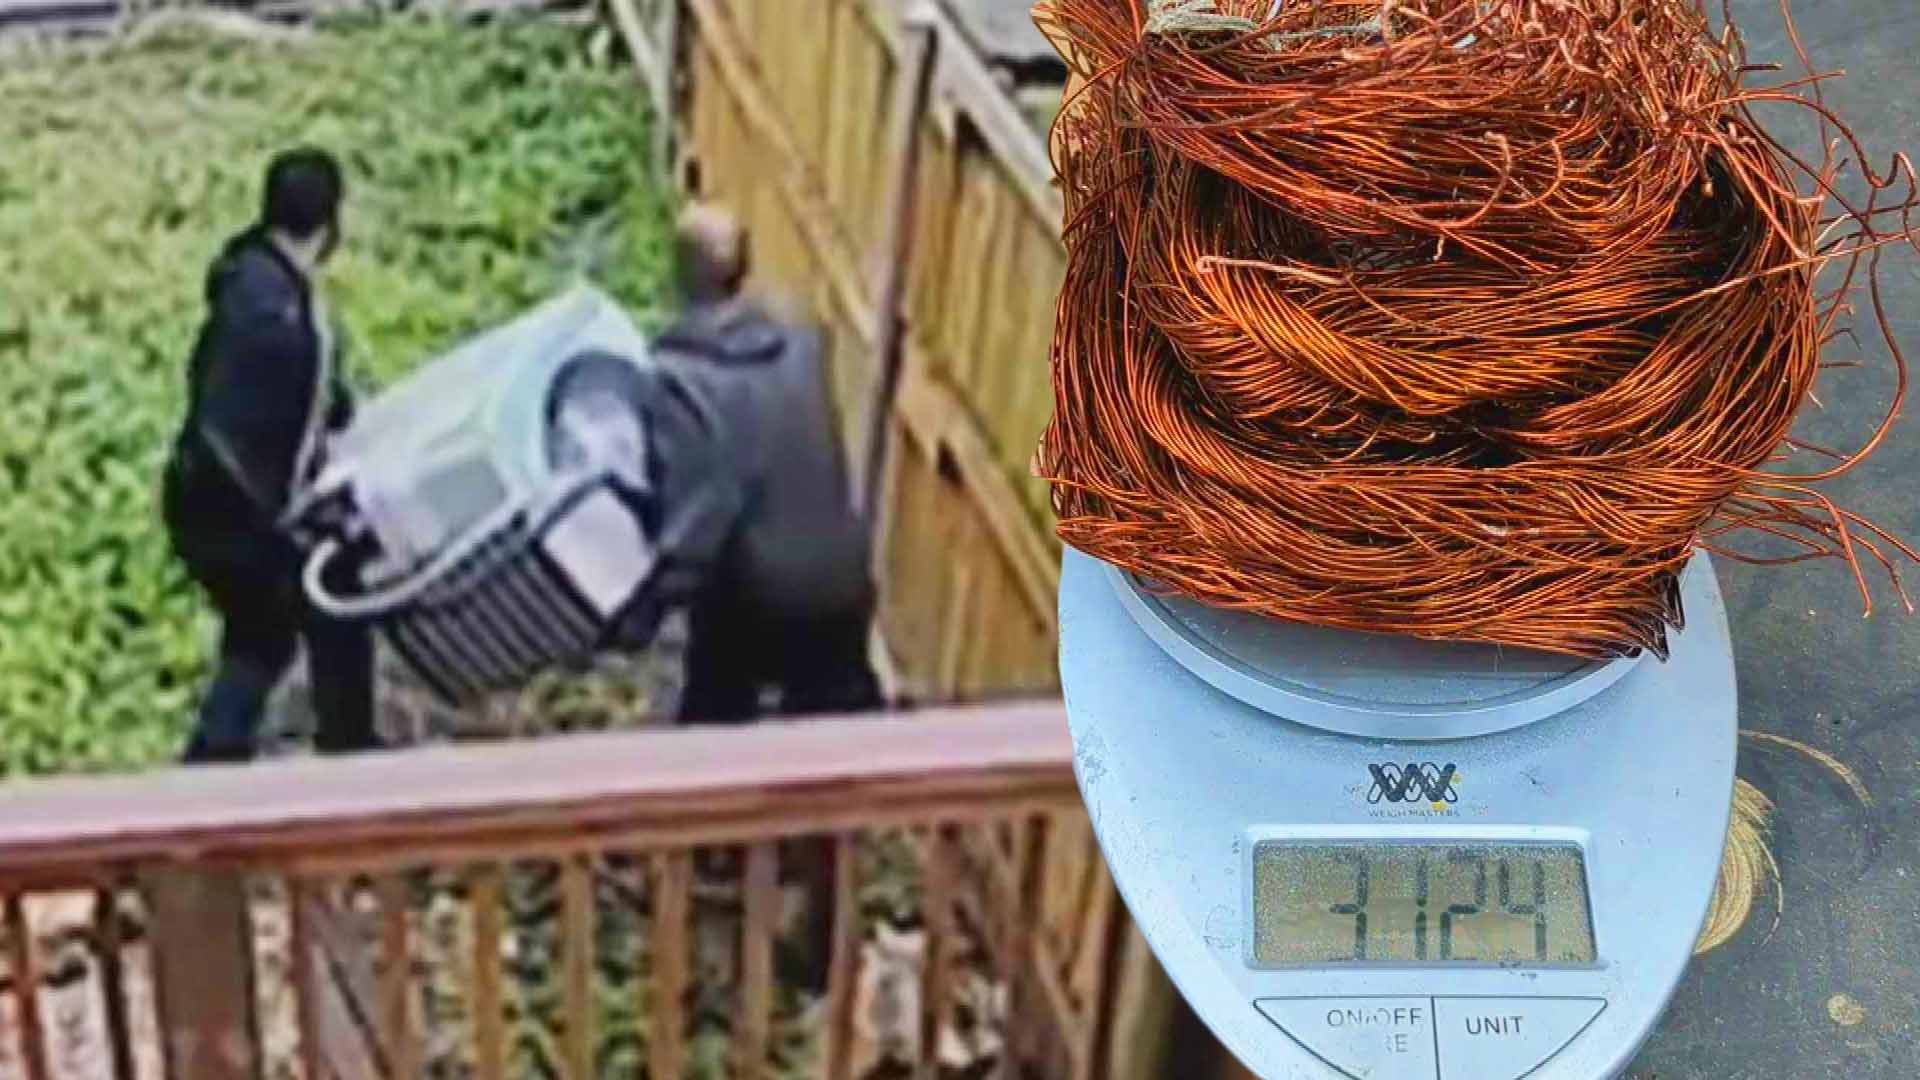 Two thieves carrying an outdoor A/C unit from under a home's porch / Copper wire coiled on a scale